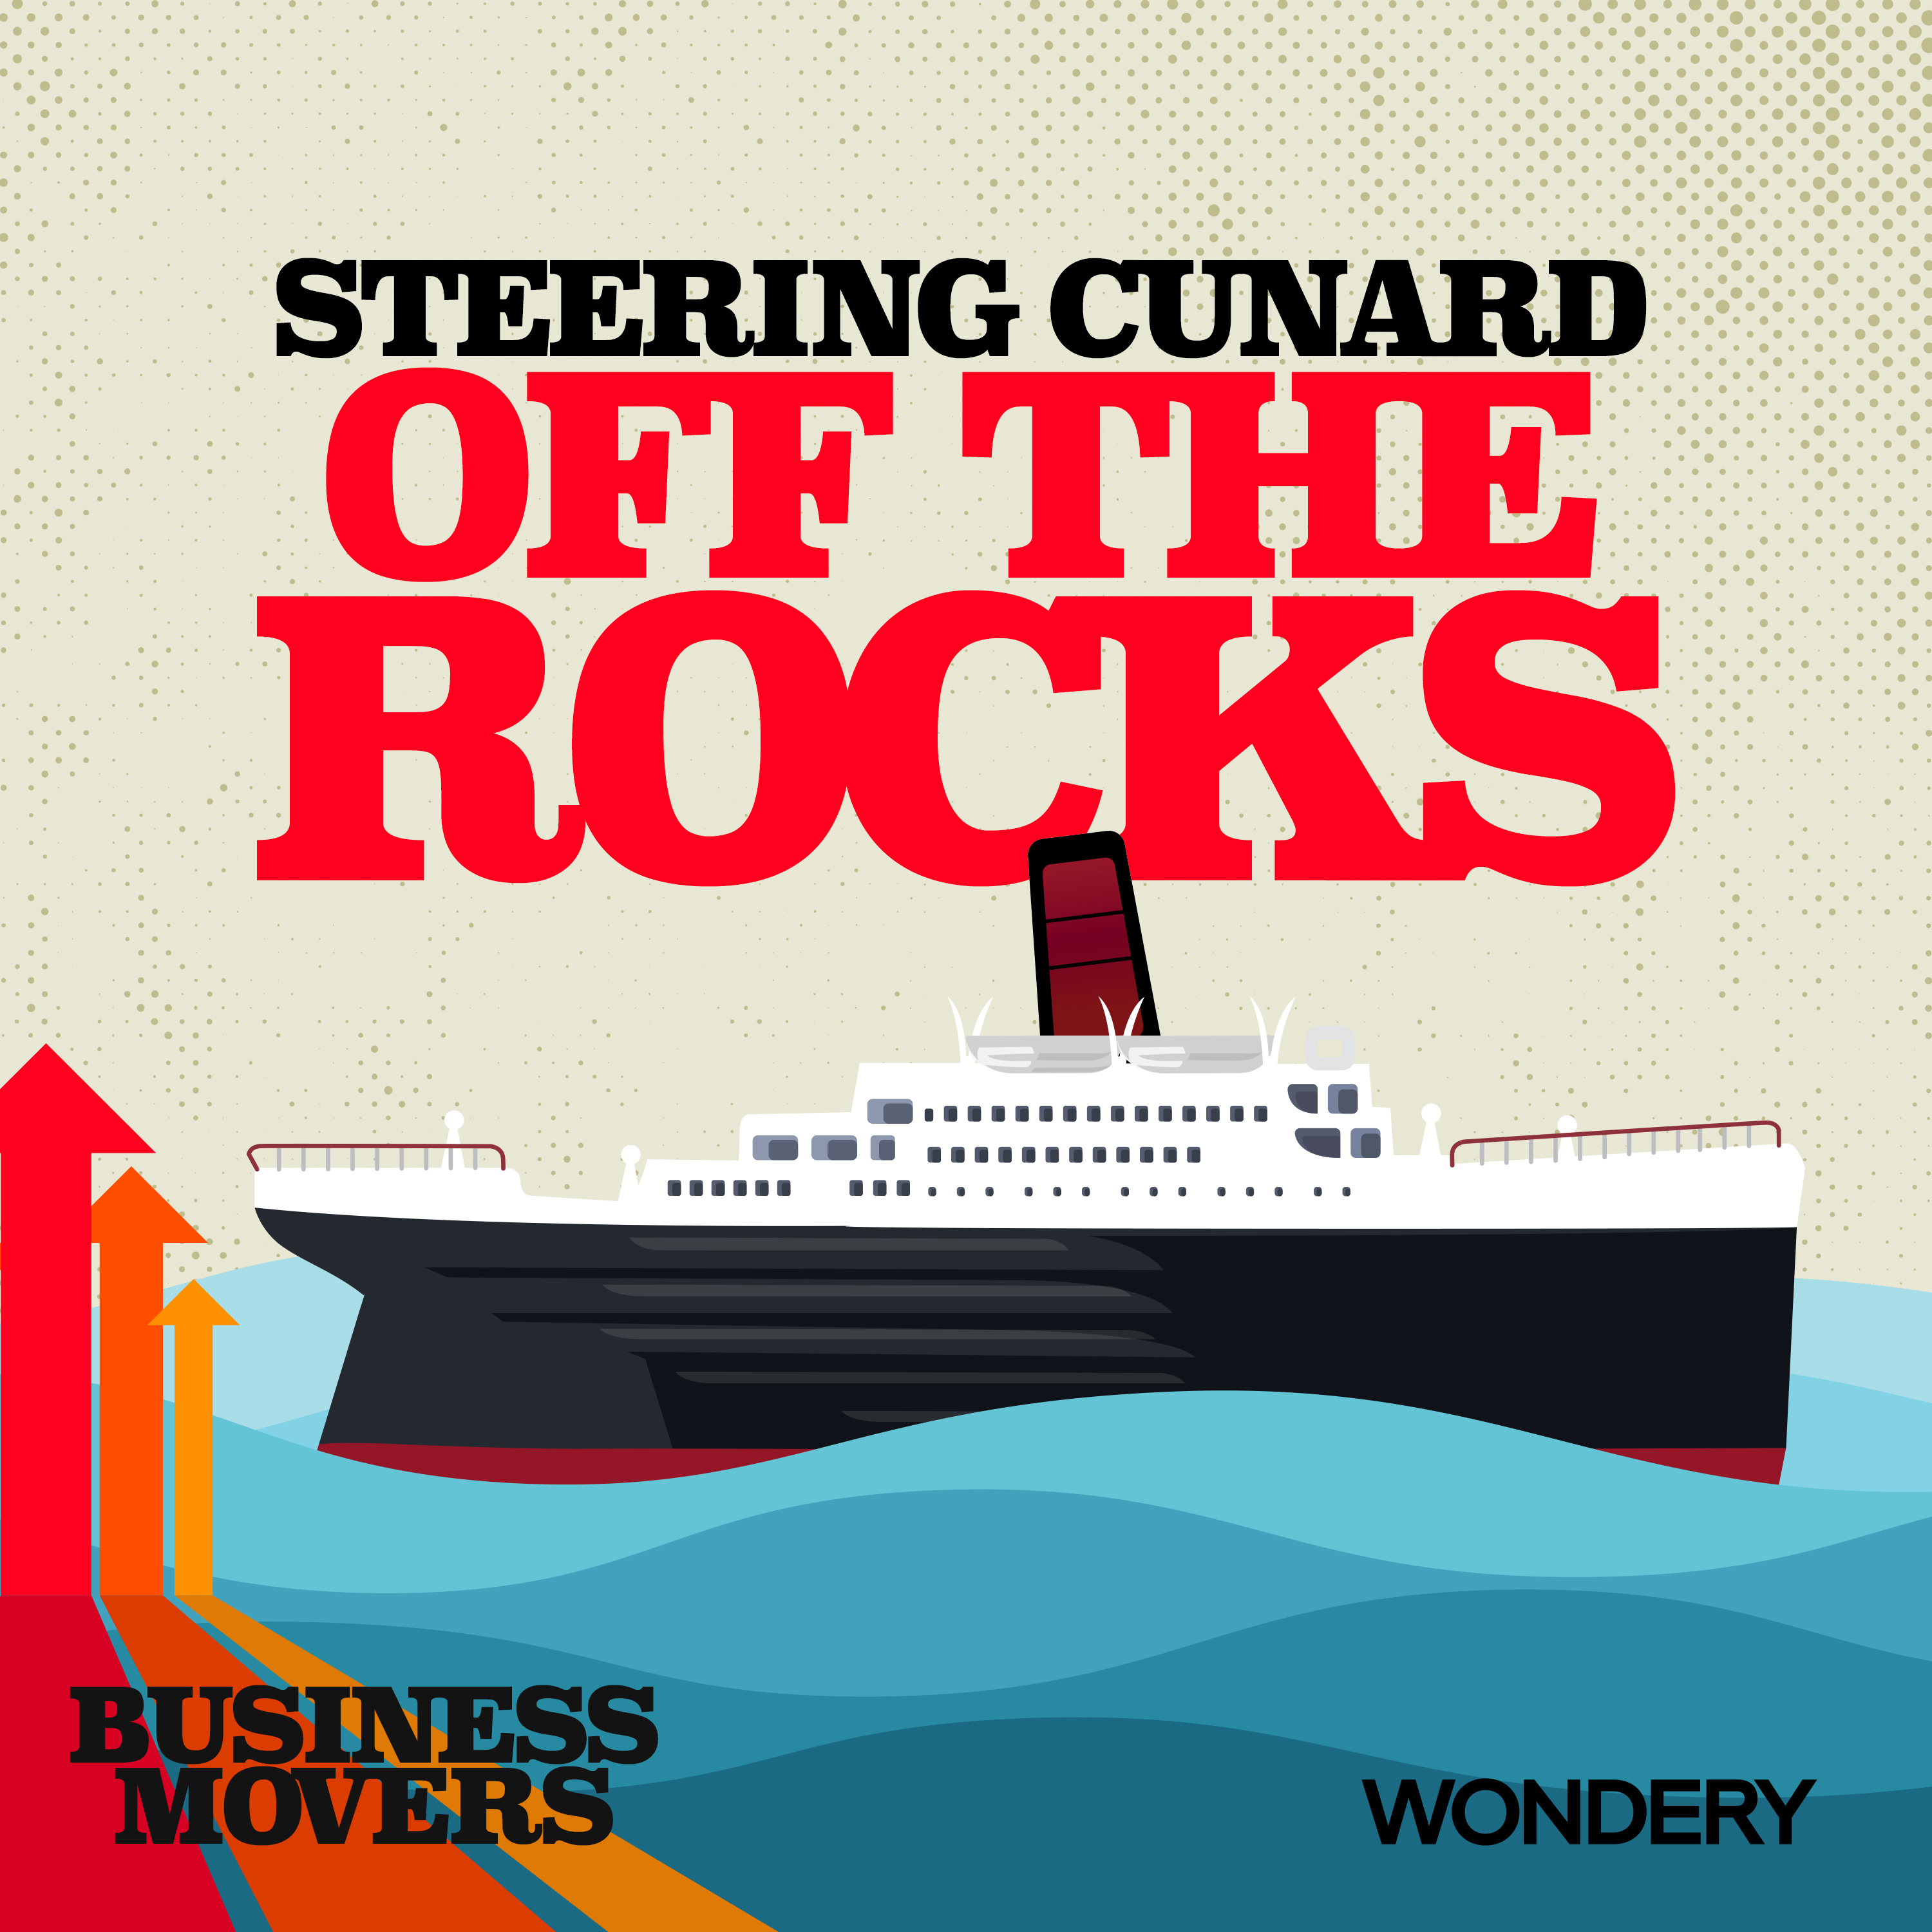 Steering Cunard Off the Rocks | Containing the Comet | 2